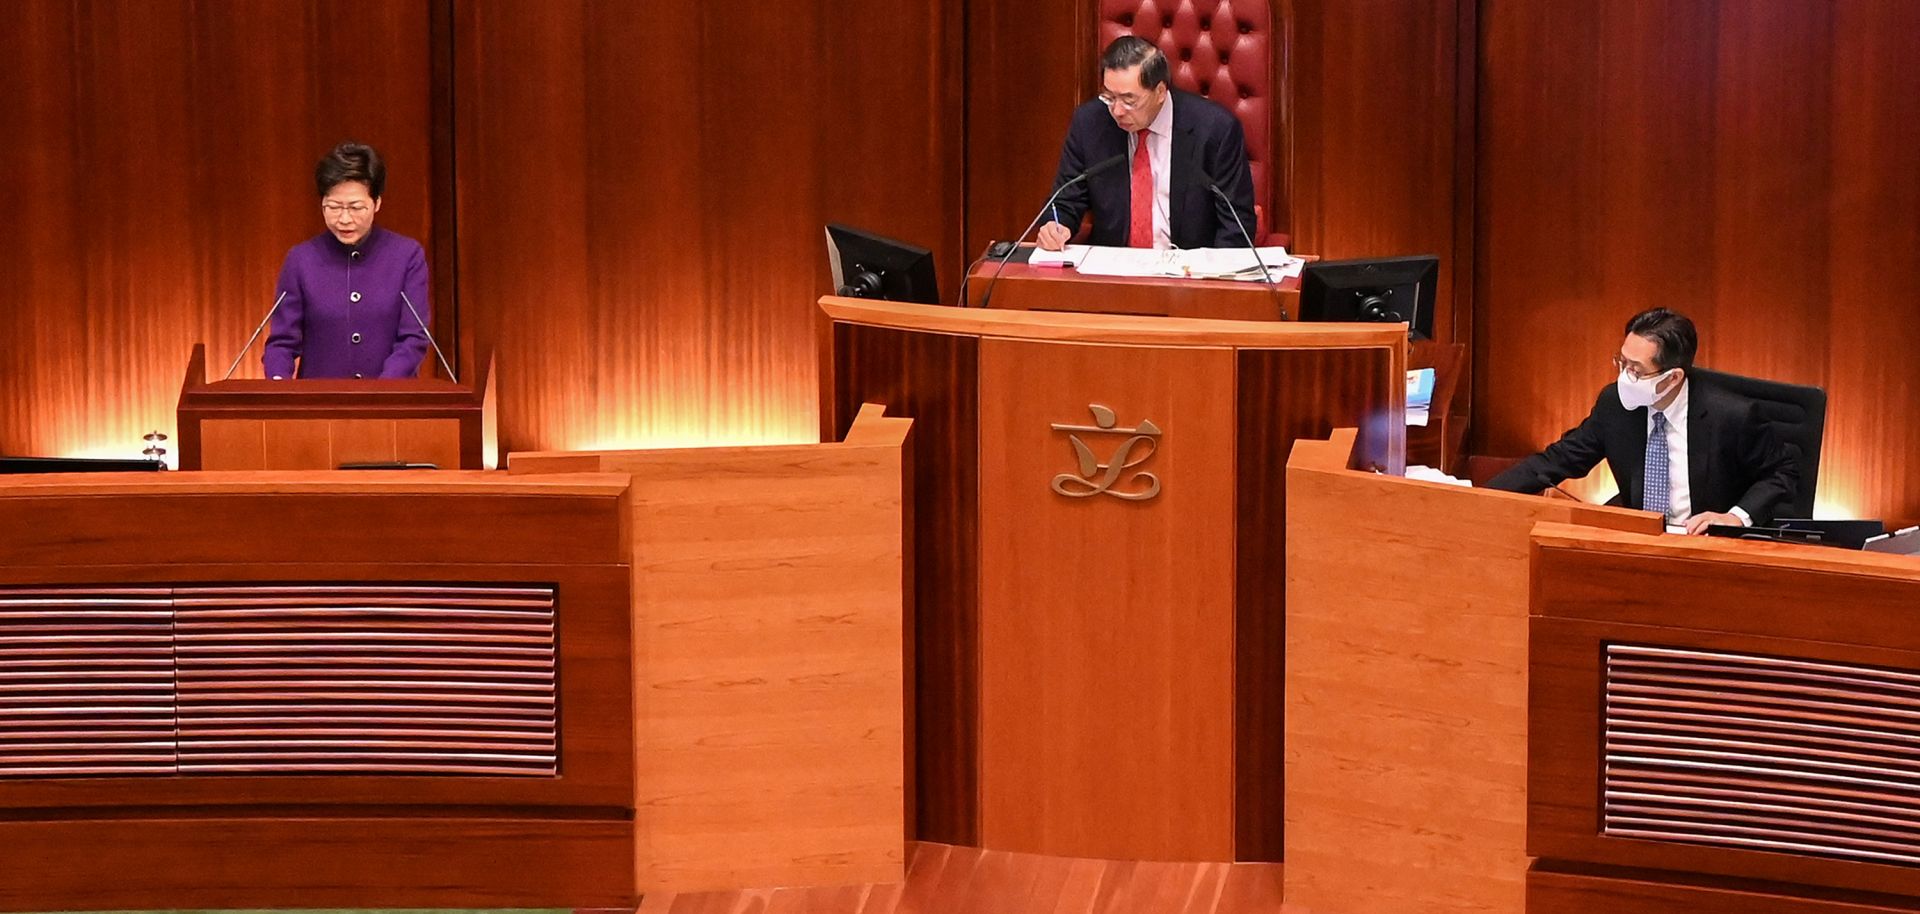 The president of Hong Kong’s Legislative Council, Andrew Leung (center), looks on as Chief Executive Carrie Lam (left) makes an address during the first session of the newly elected legislature on Jan. 12, 2022. 